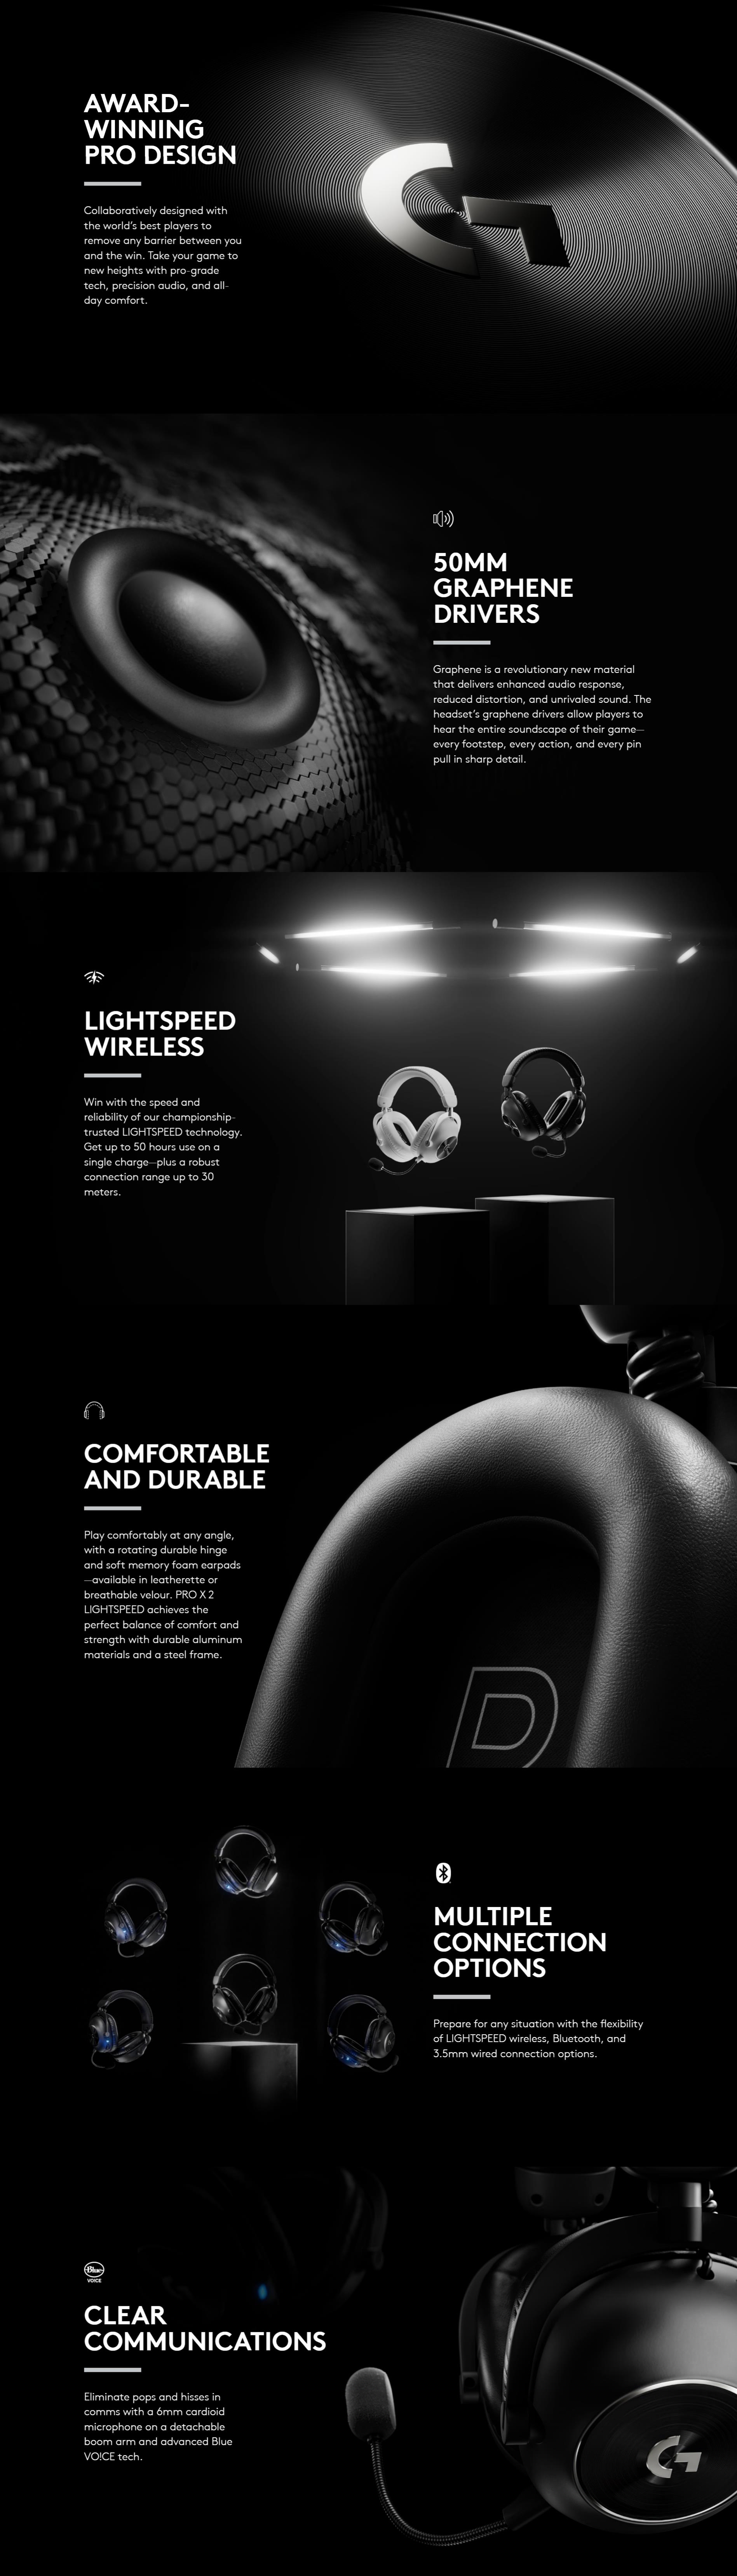 A large marketing image providing additional information about the product Logitech PRO X 2 LIGHTSPEED Wireless Gaming Headset - Black - Additional alt info not provided